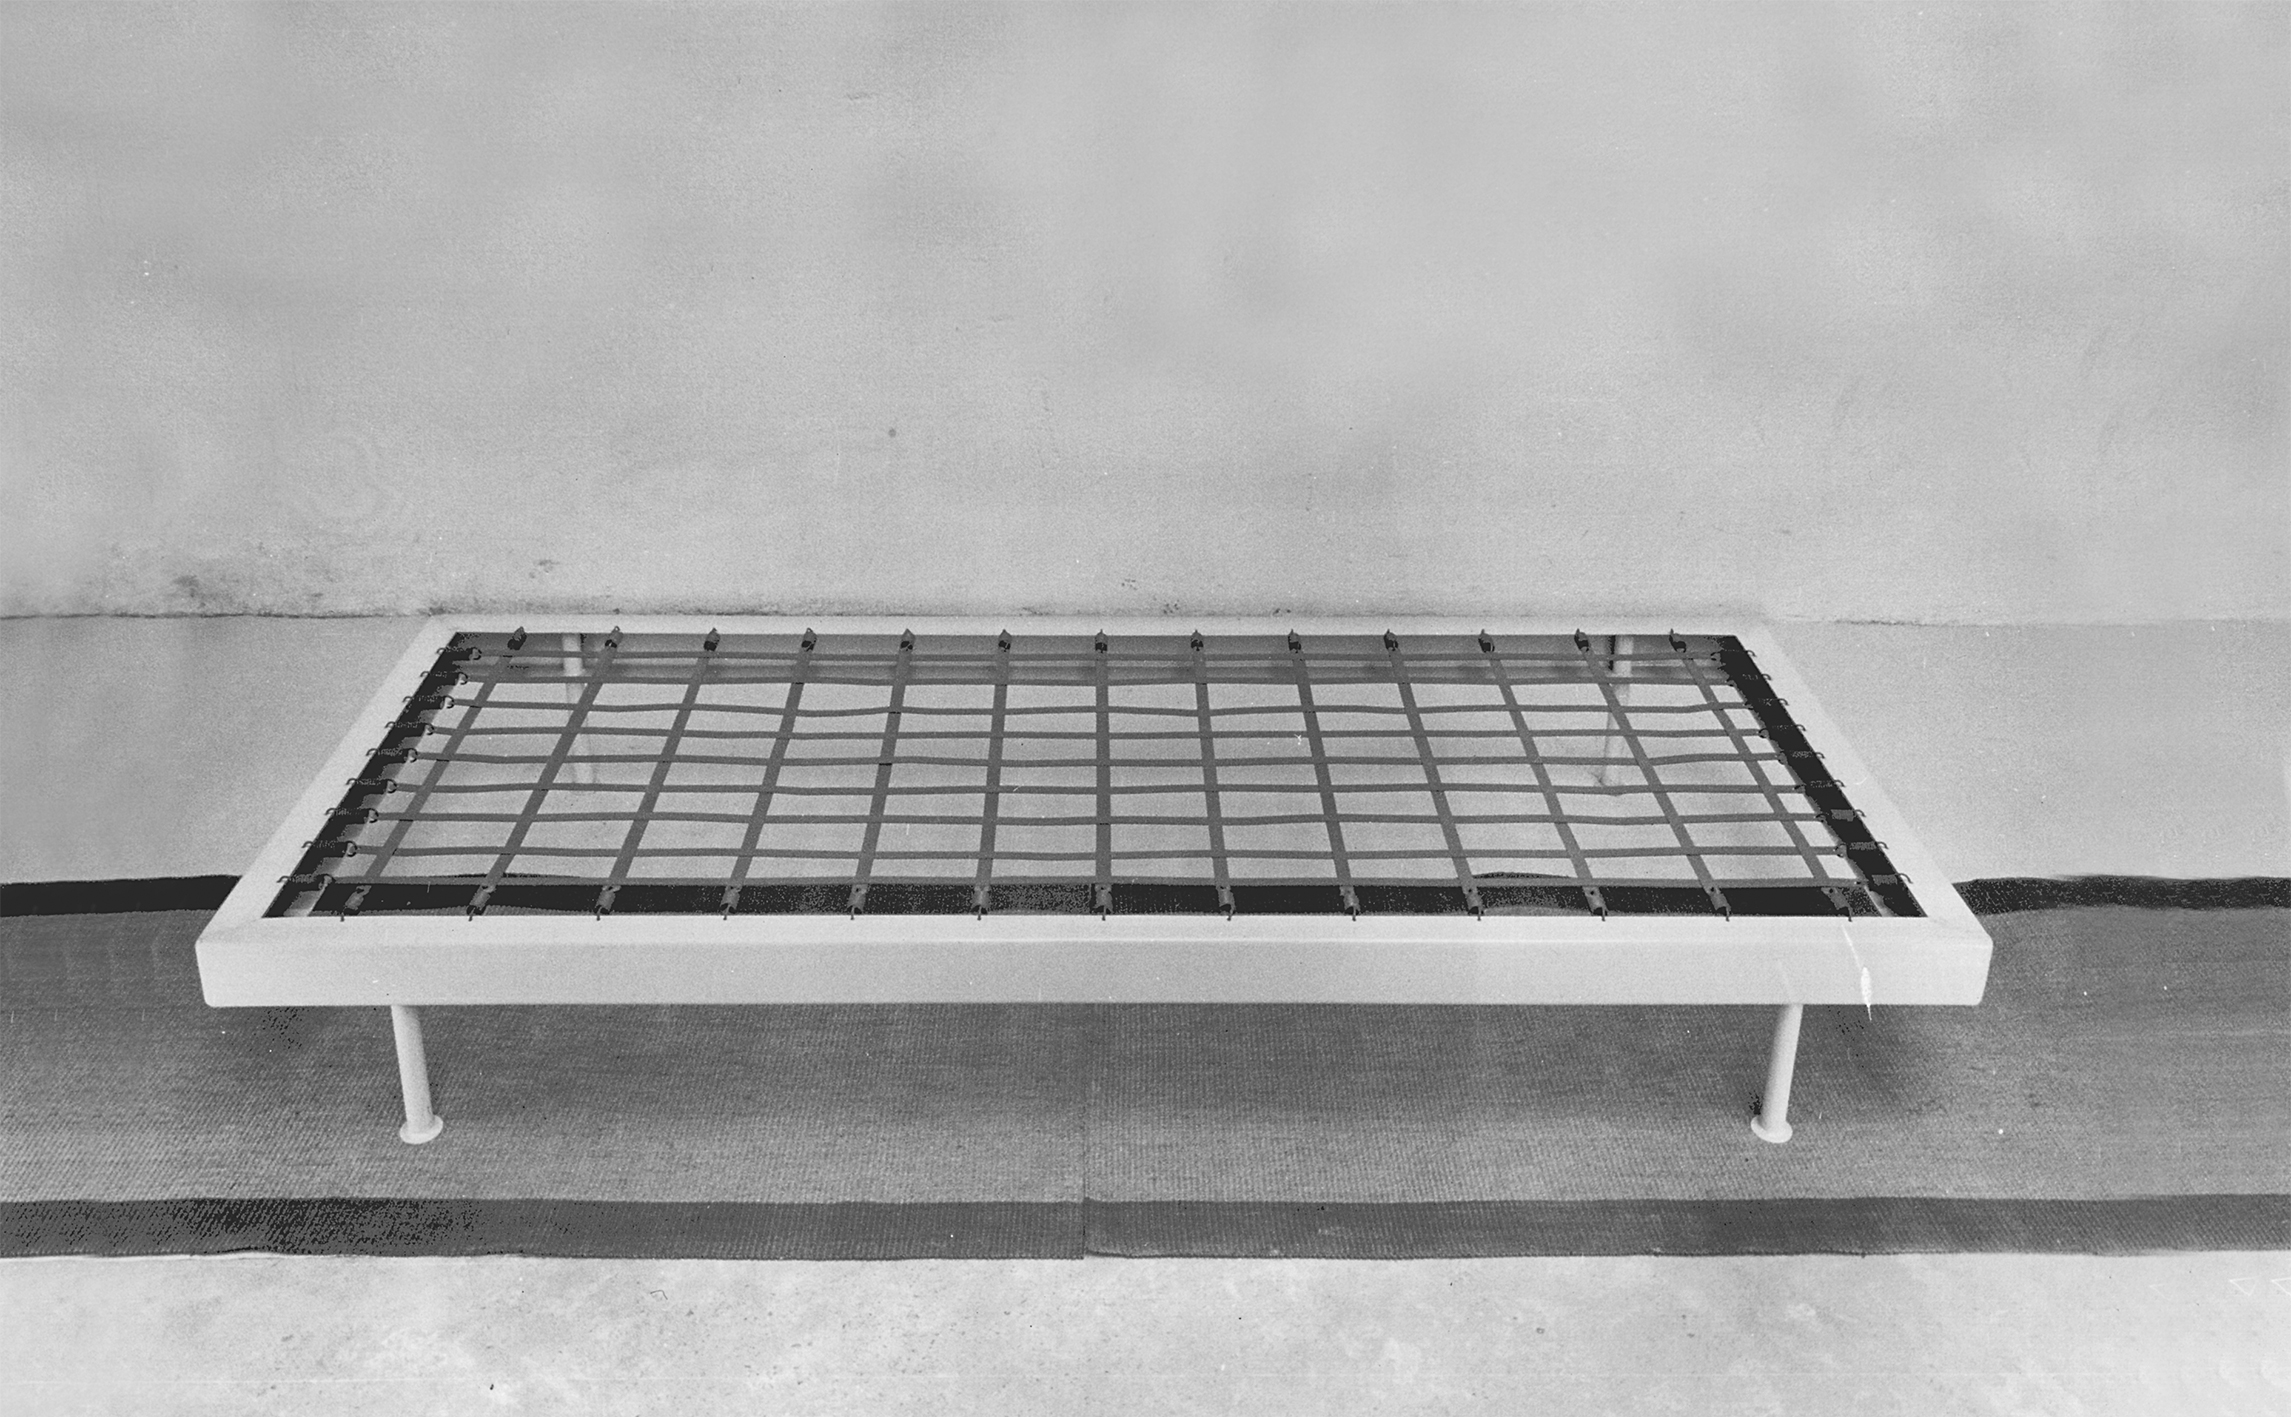 SCAL LS 21 bed, 1946.